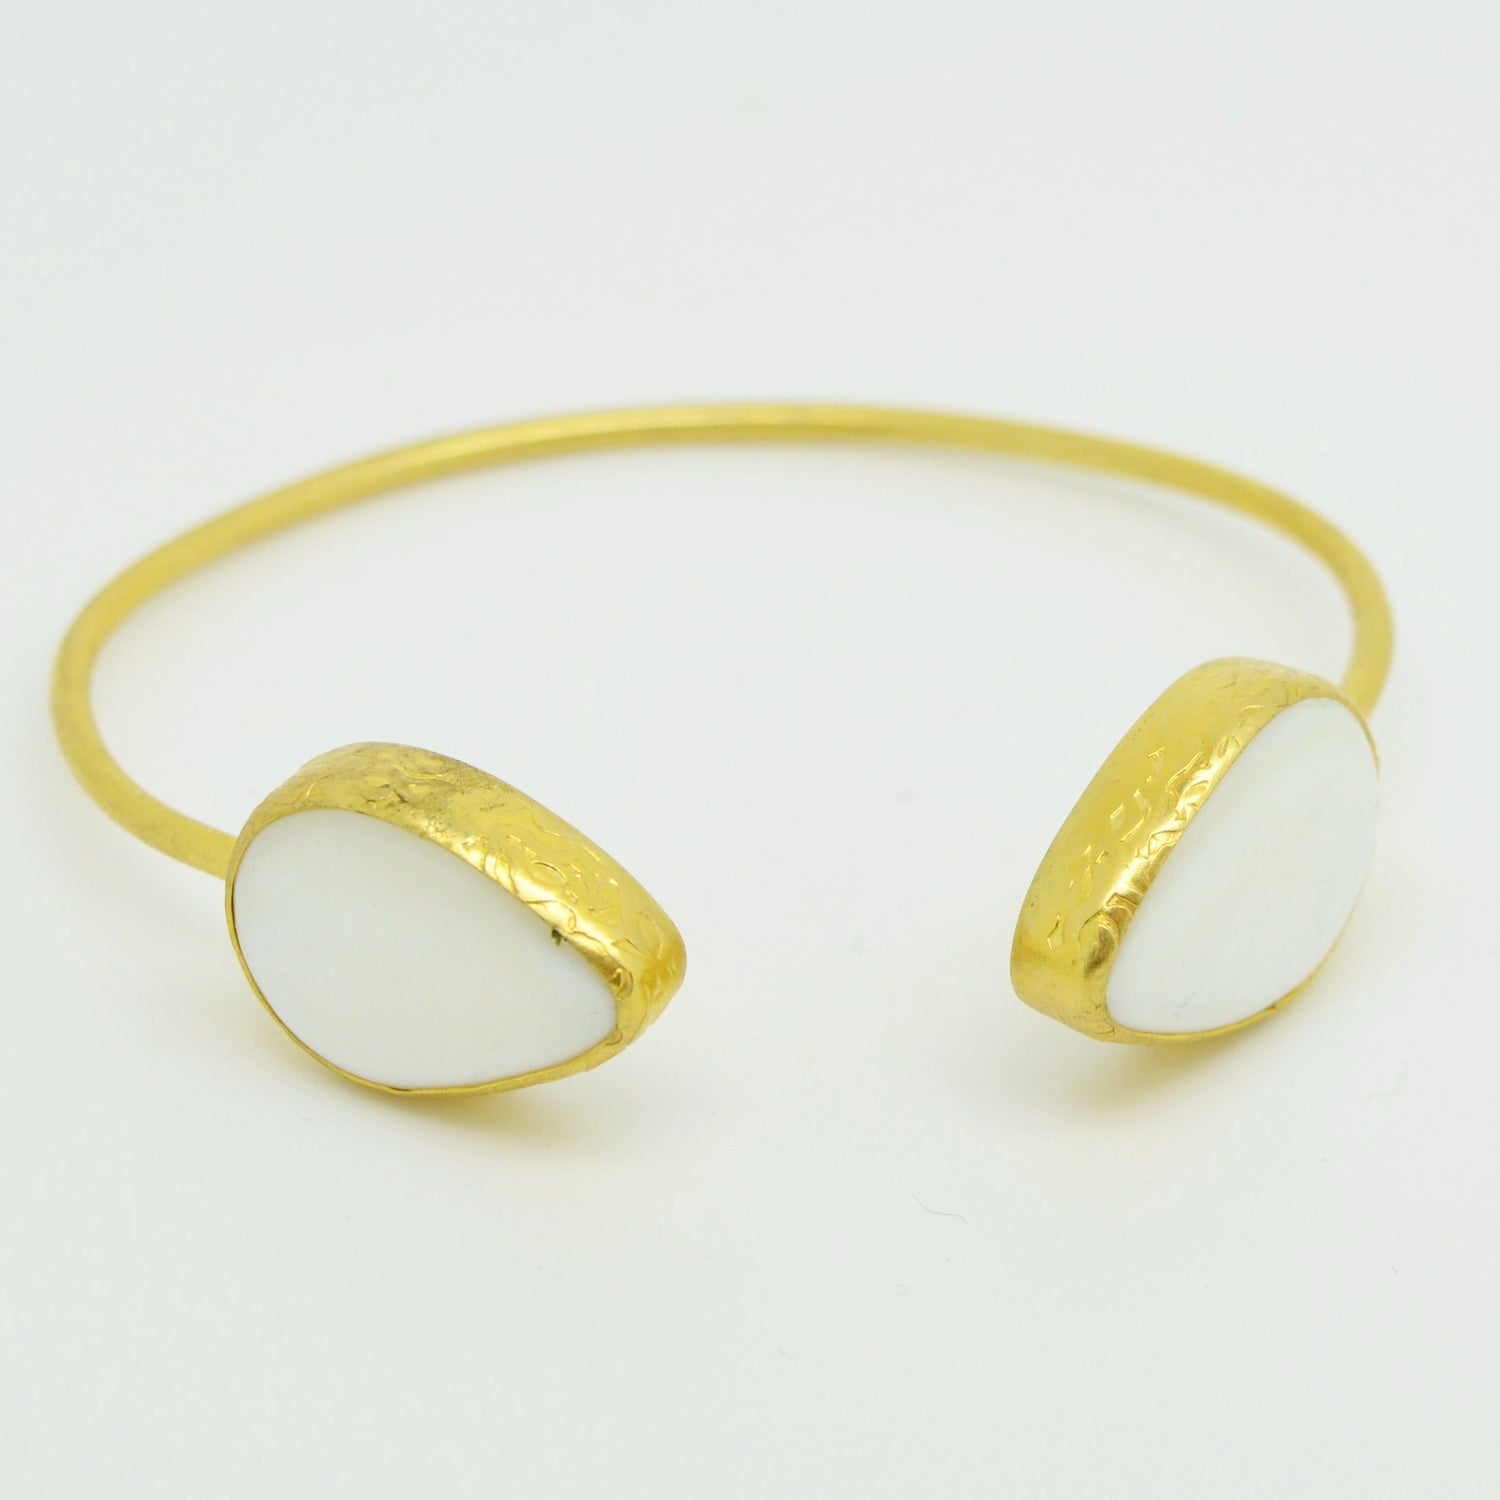 Aylas Mother Pearl Bracelet / Bangle - 21ct Gold plated semi precious gemstone - Handmade in Ottoman Style by Artisan